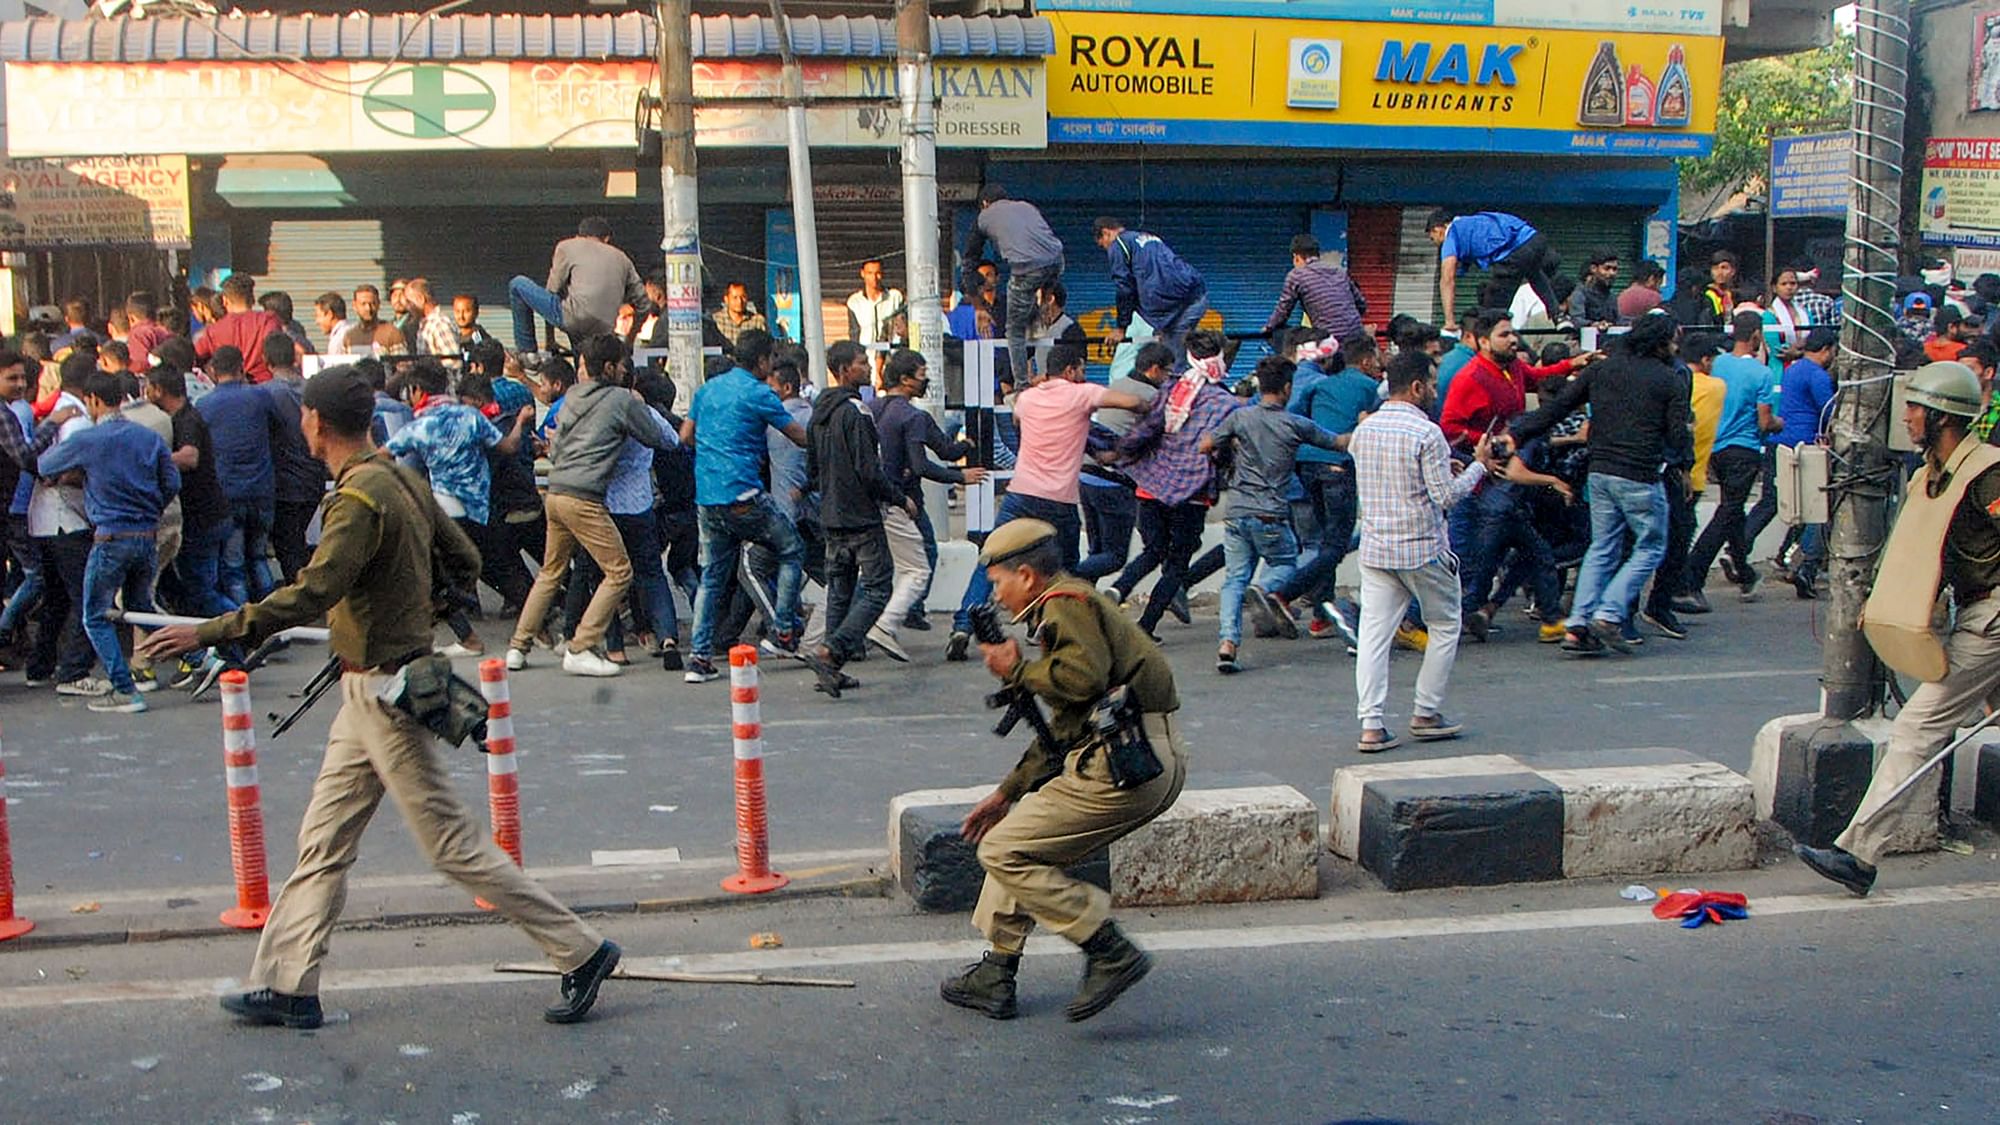 Bangladesh on 12 December summoned the Indian envoy to lodge a protest after an angry crowd attacked the convoy of the Assistant High Commissioner of Bangladesh in Guwahati.